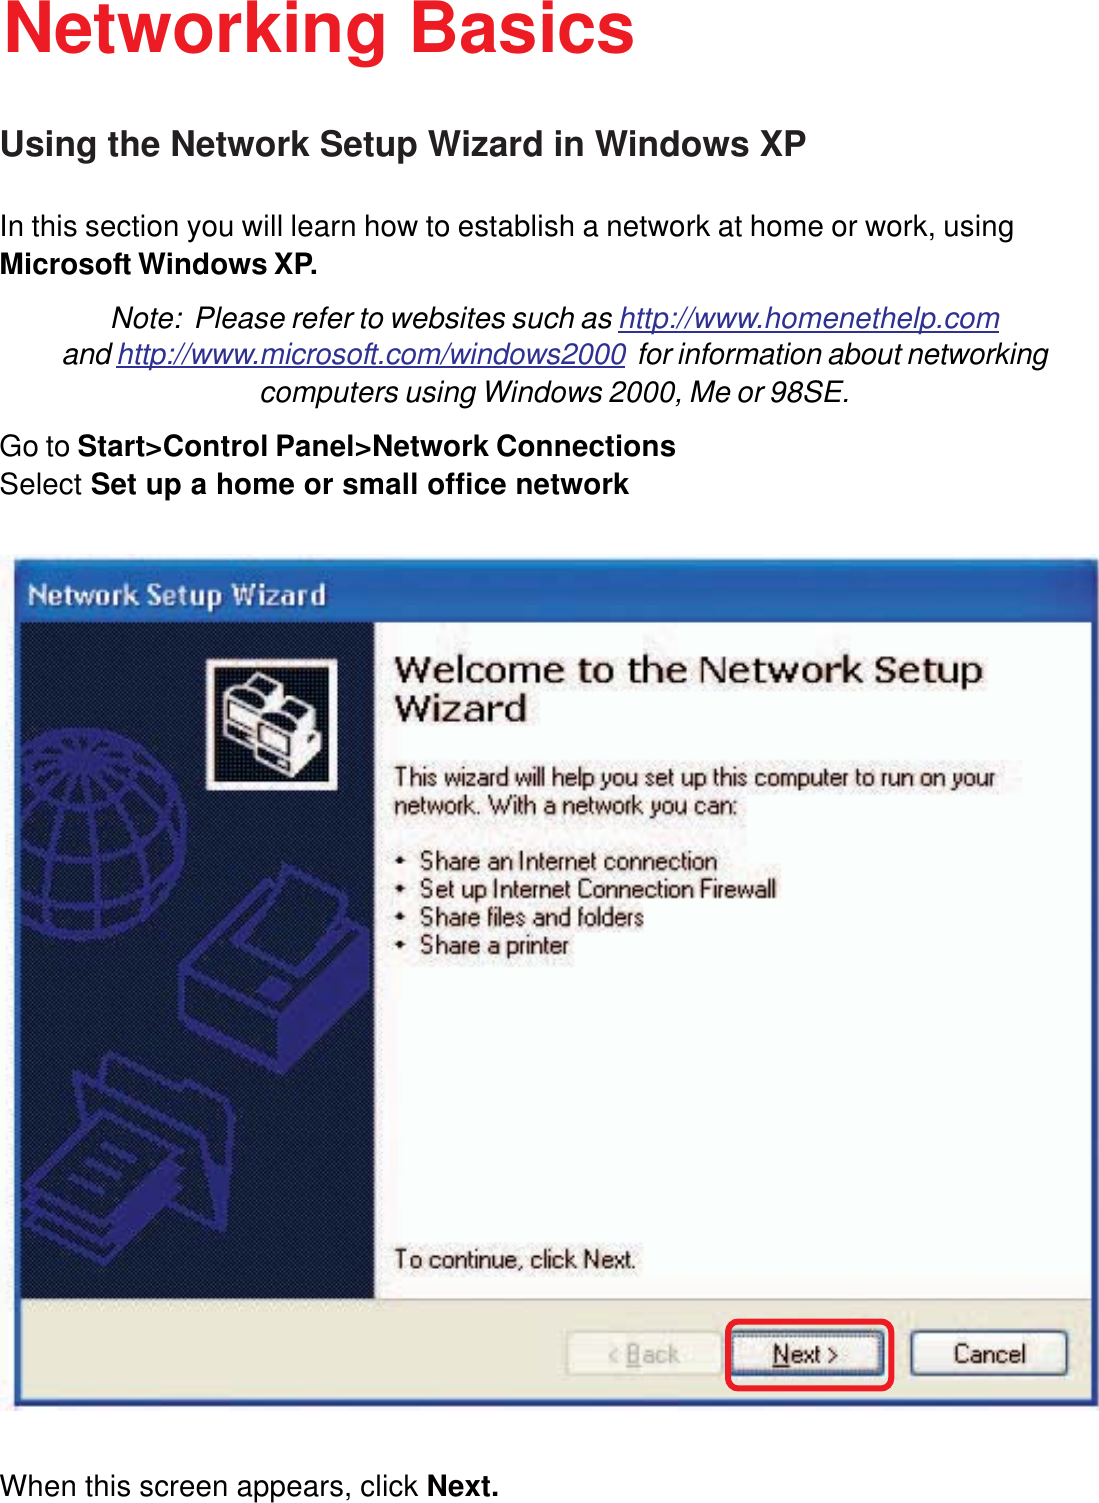 19Using the Network Setup Wizard in Windows XPIn this section you will learn how to establish a network at home or work, usingMicrosoft Windows XP.Note:  Please refer to websites such as http://www.homenethelp.comand http://www.microsoft.com/windows2000  for information about networkingcomputers using Windows 2000, Me or 98SE.Go to Start&gt;Control Panel&gt;Network ConnectionsSelect Set up a home or small office networkNetworking BasicsWhen this screen appears, click Next.